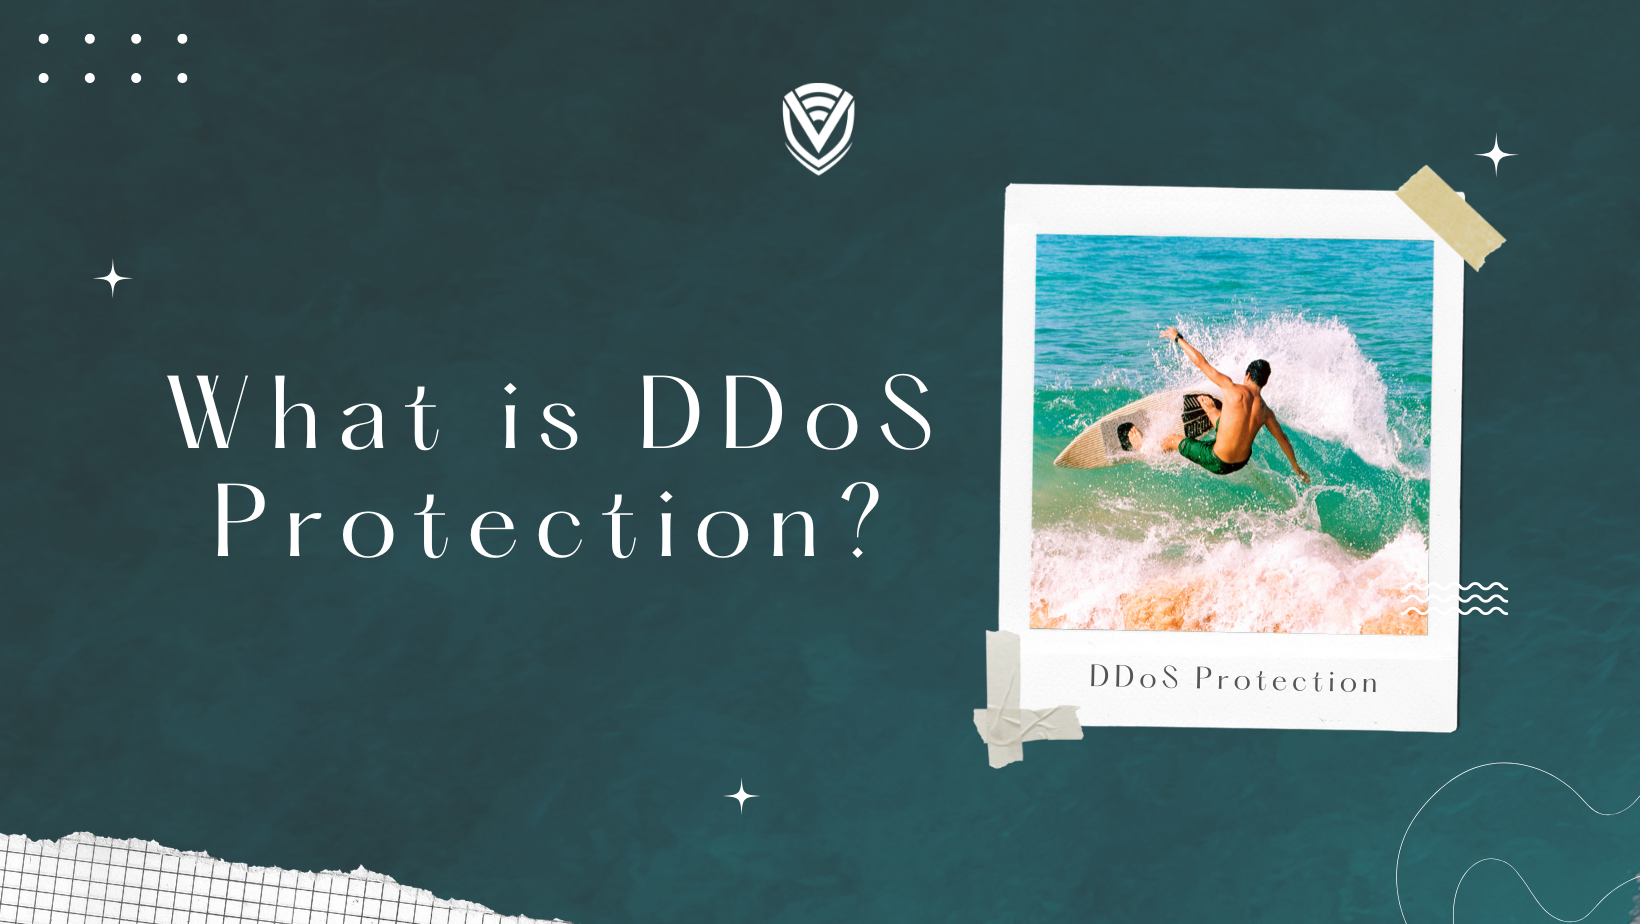 What is DDoS Protection?